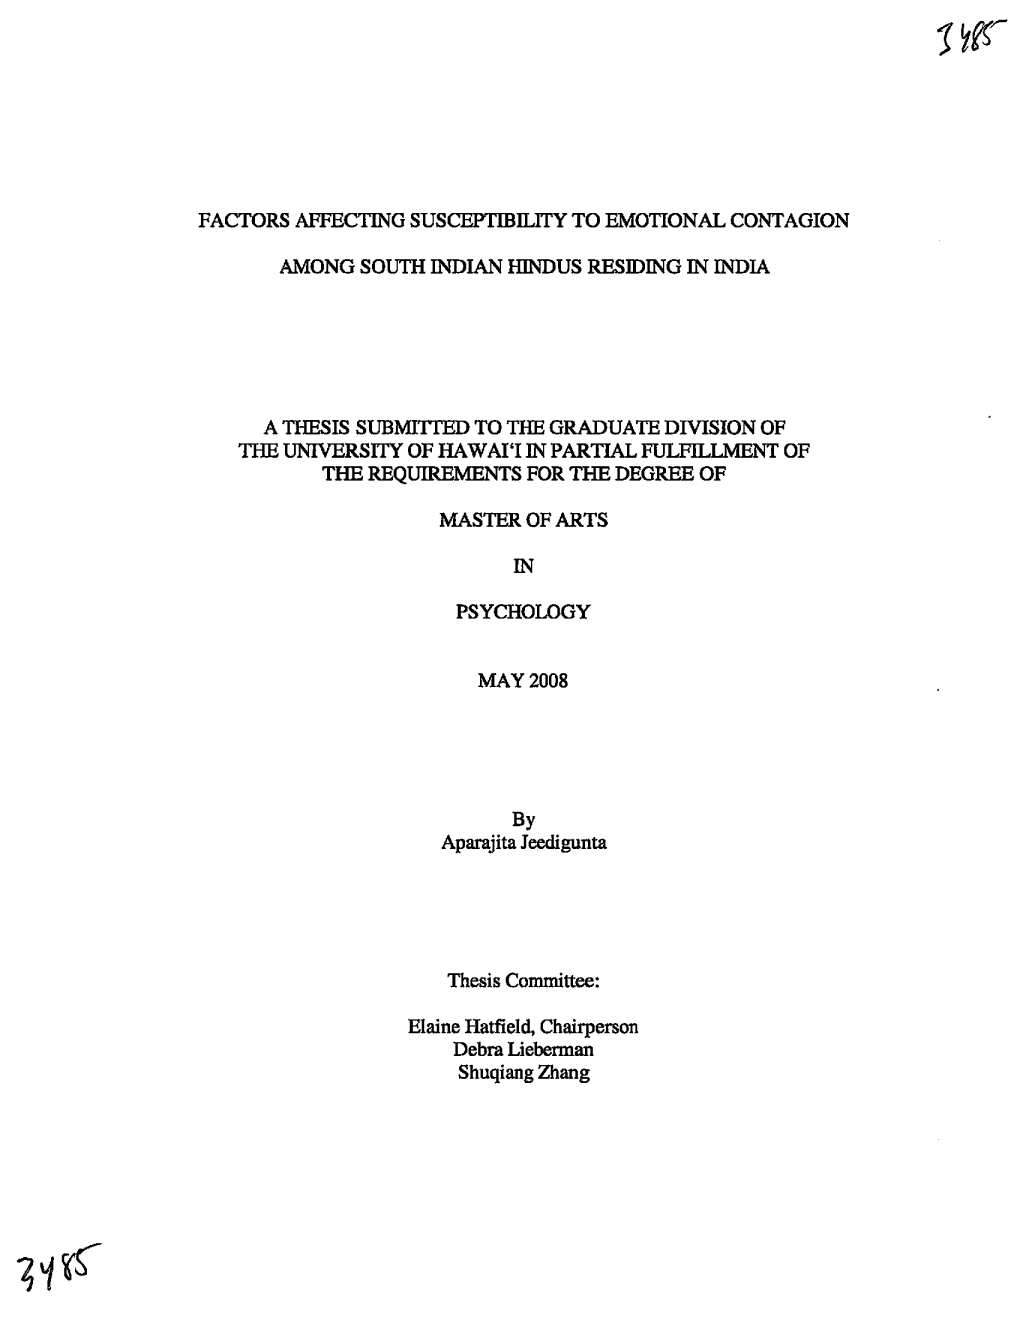 Factors Affecting Susceptibility to Emotional Contagion Among South Indian Hindus Residing in India a Thesis Submitted to Tiie G